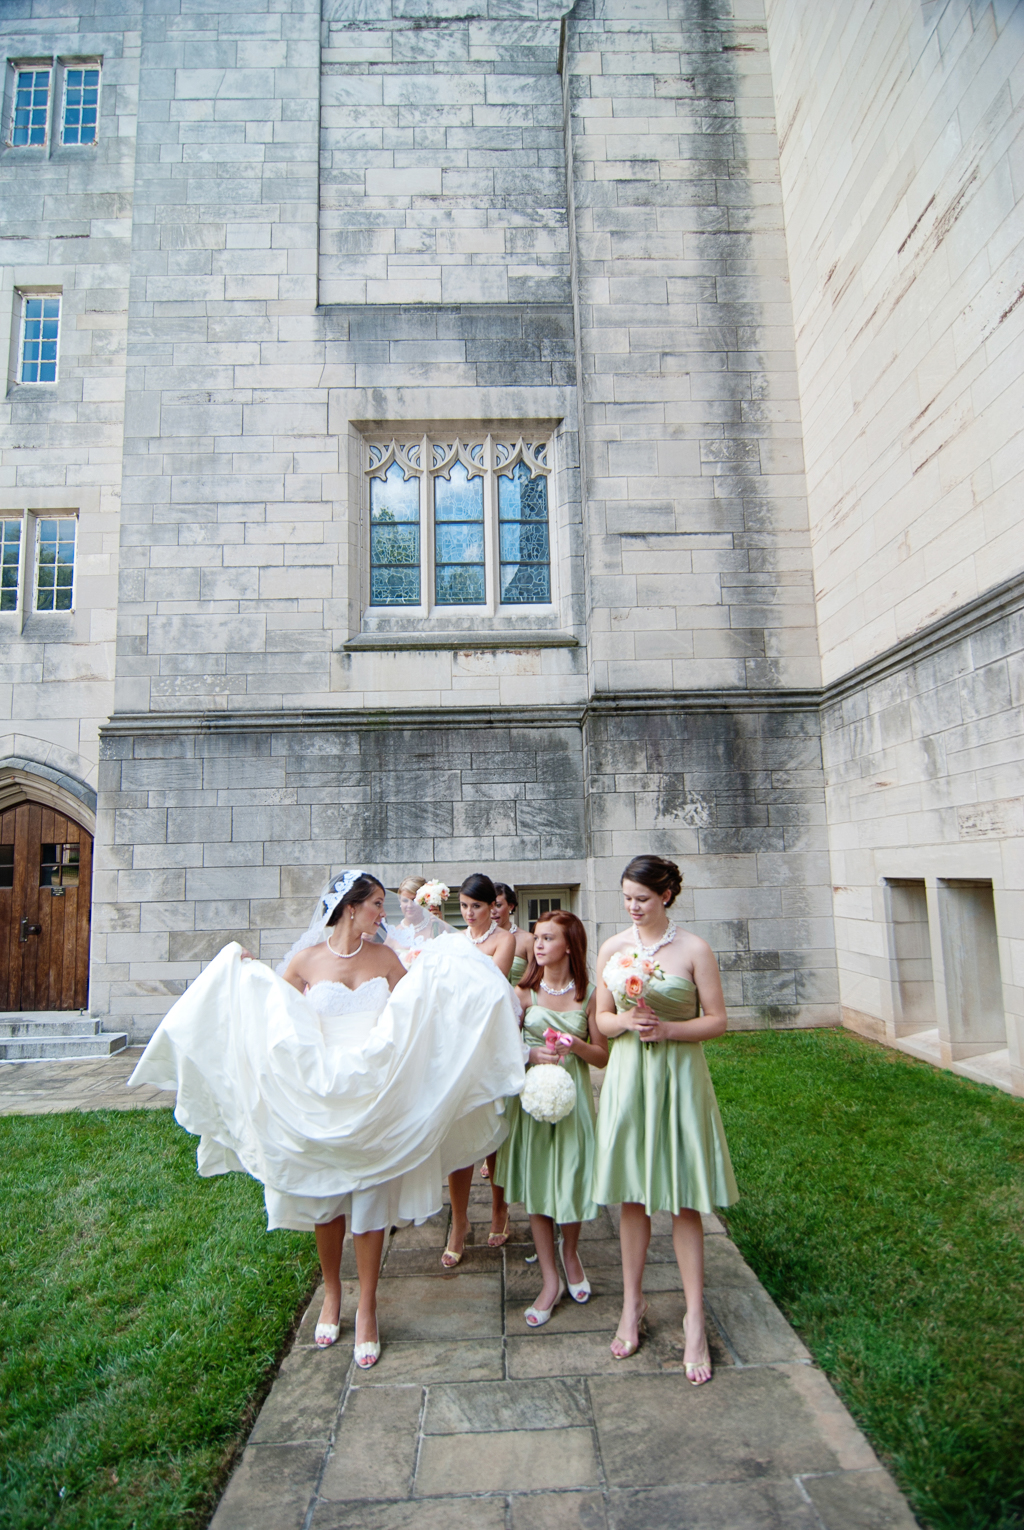 bride lifts giant wedding dress up as she walks with her bridesmaids outside the church